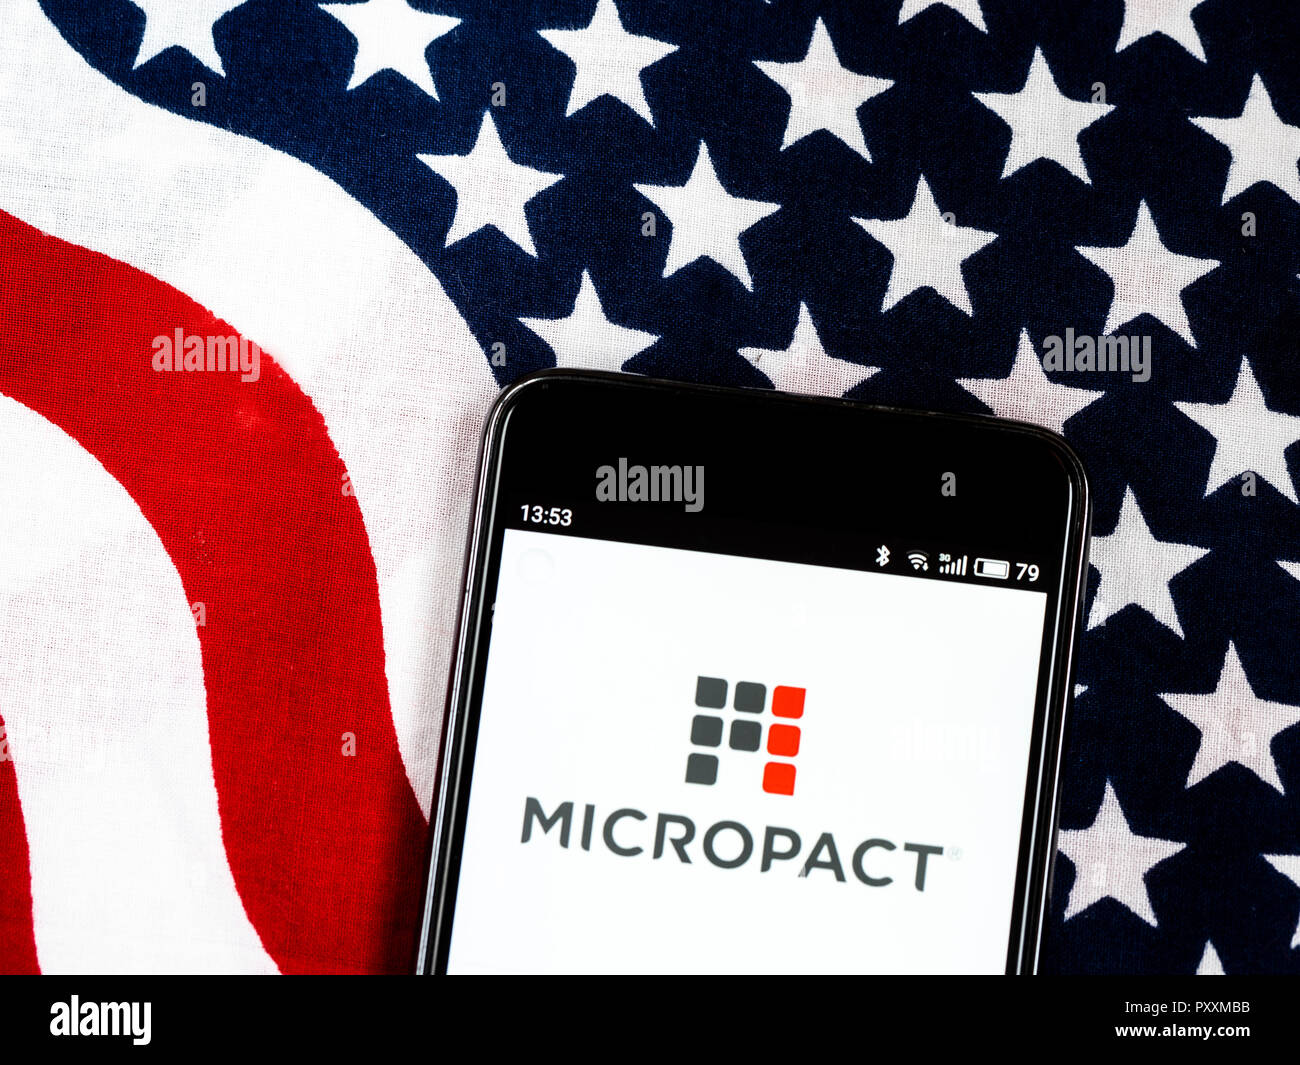 MicroPact Inc.Software company logo seen displayed on smart phone.MicroPact Inc. develops and provides case management and business process management software solutions to customers in government, commercial, and education sectors. Stock Photo